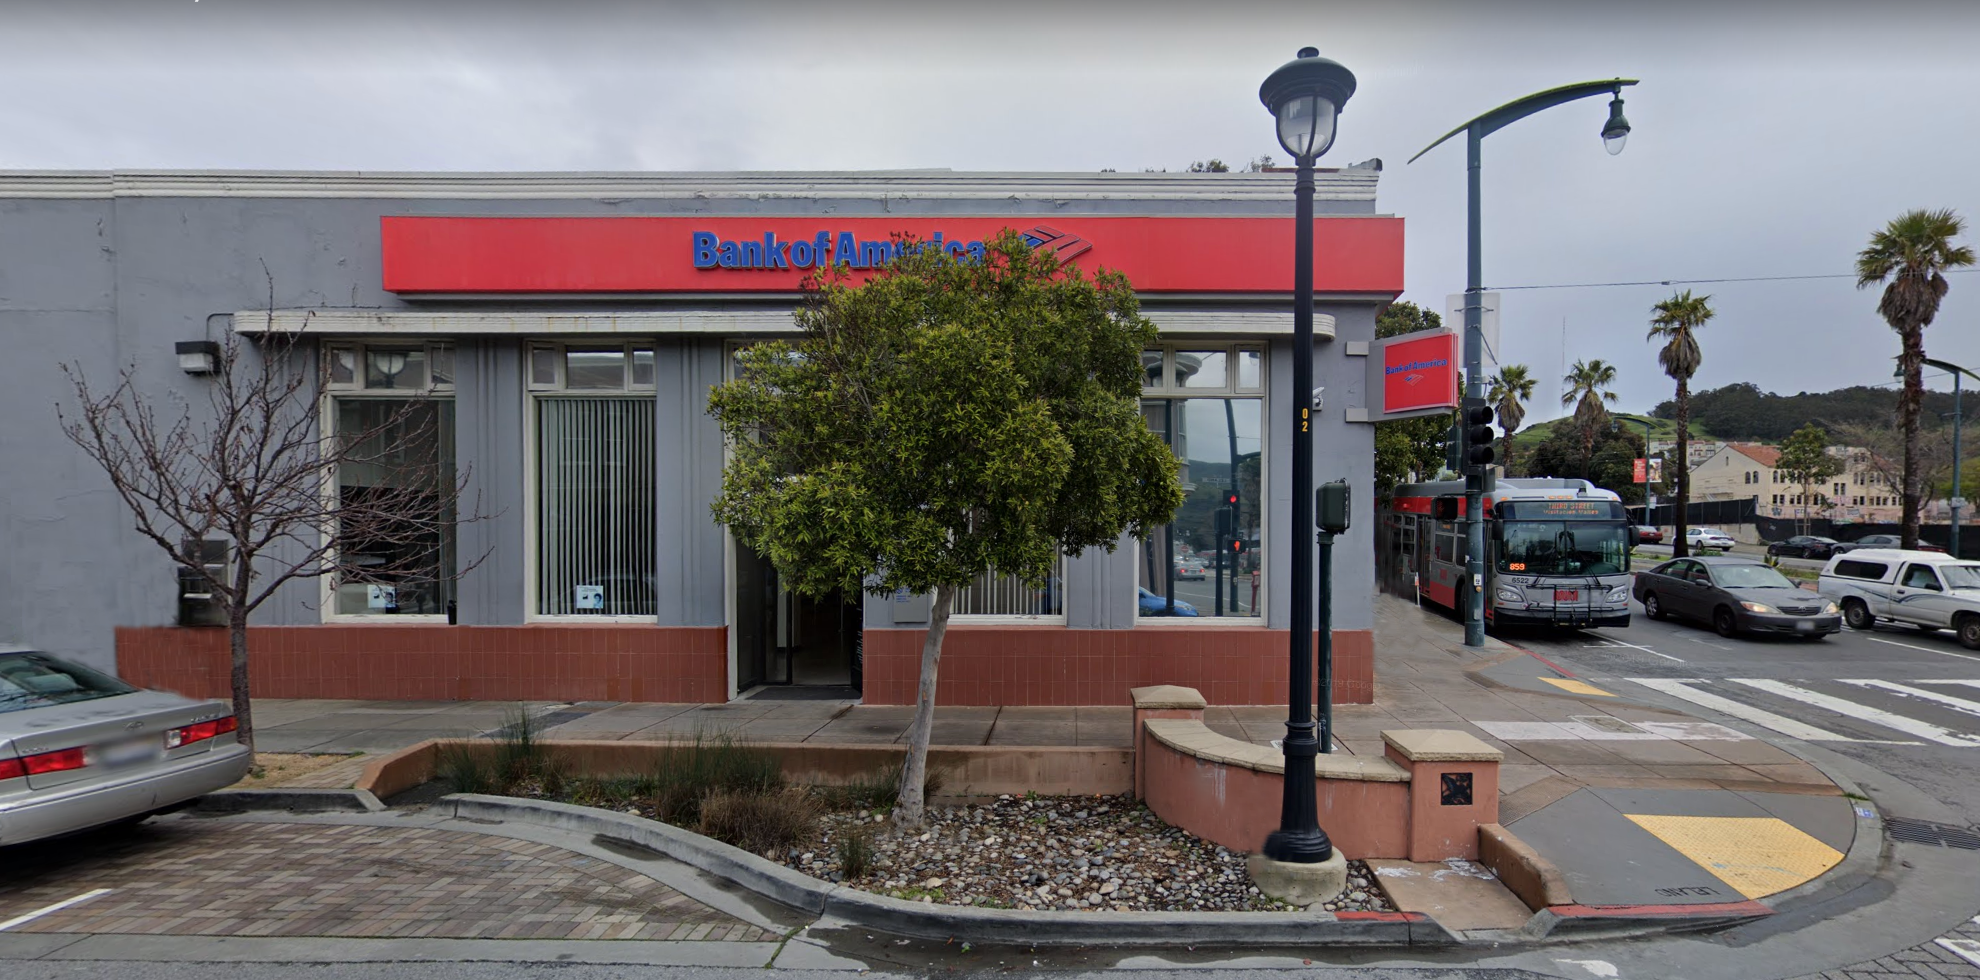 Bank of America financial center with walk-up ATM | 6 Leland Ave, San Francisco, CA 94134